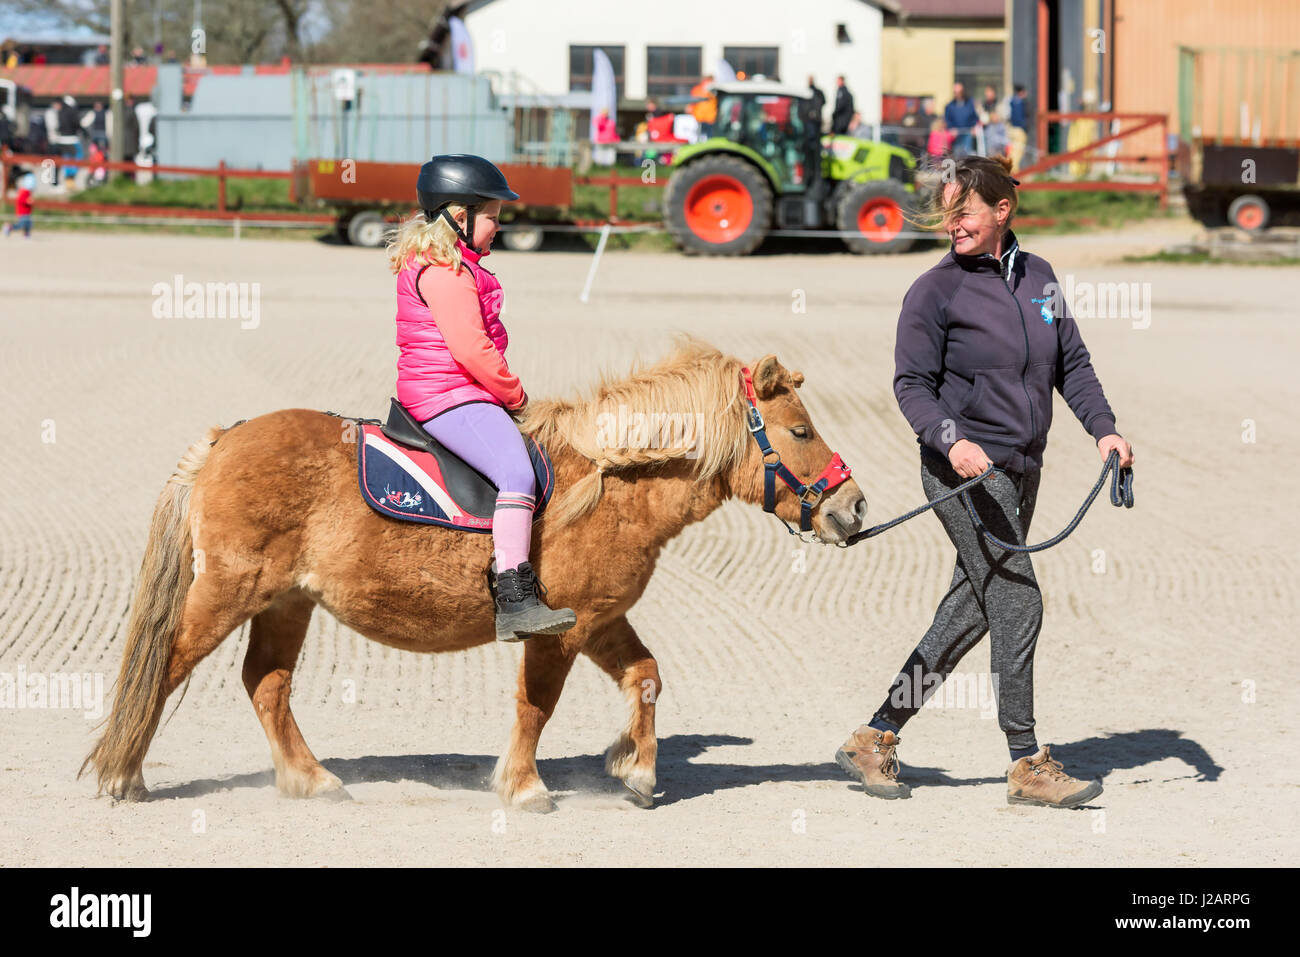 Brakne Hoby, Sweden - April 22, 2017: Documentary of small public farmers day. Young girl pony riding with adult handler in front of horse. Smiling fa Stock Photo